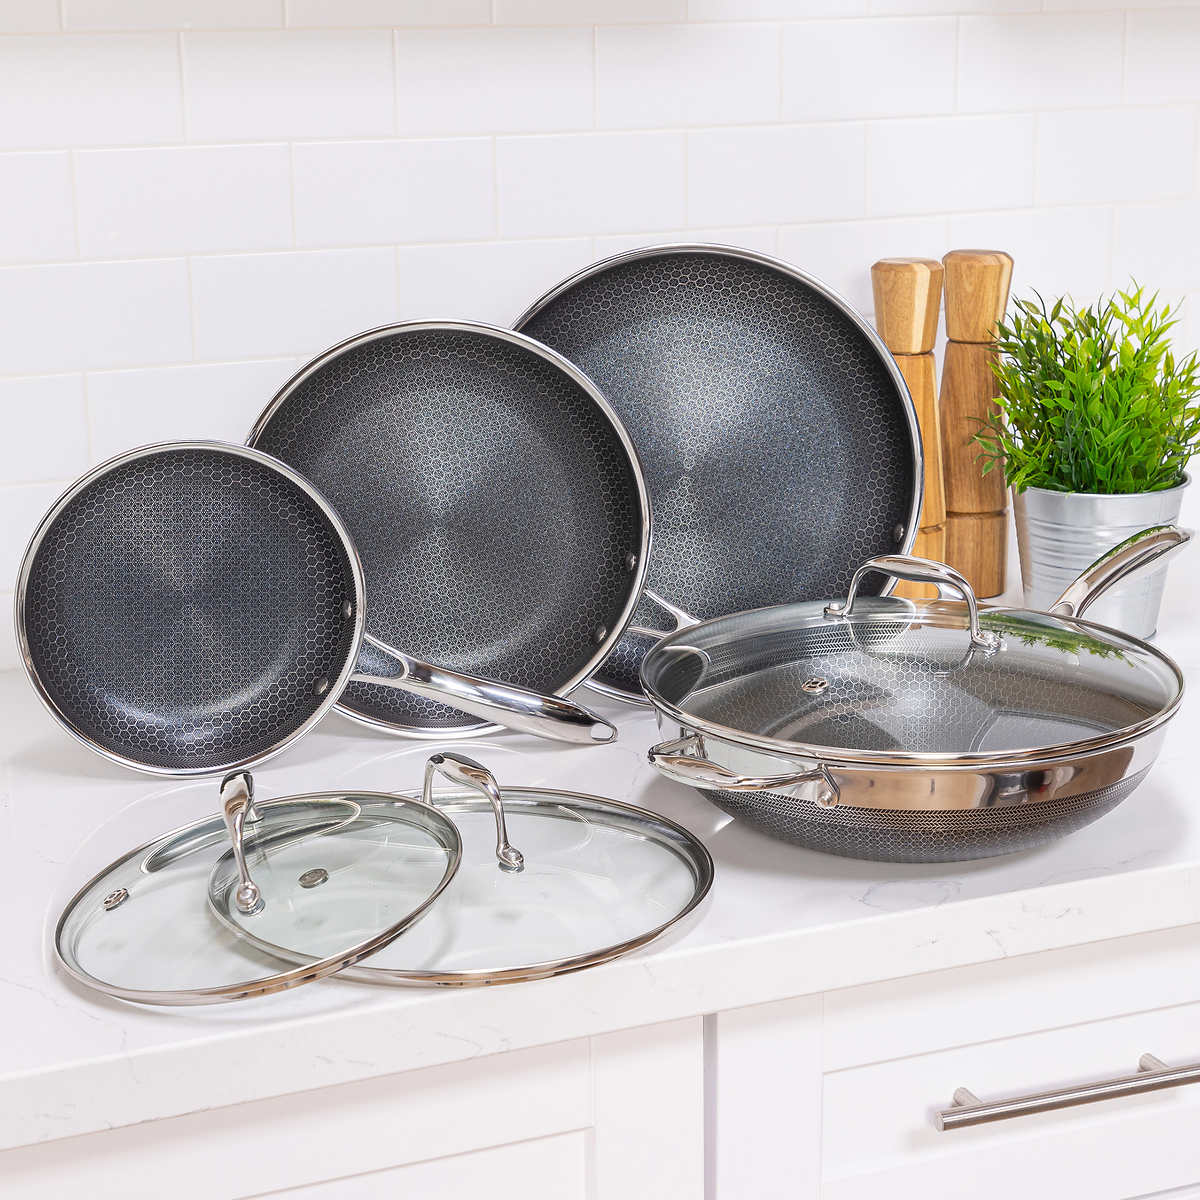 HexClad Pans Reviews - Does This Pans Worth Buying? Must Read